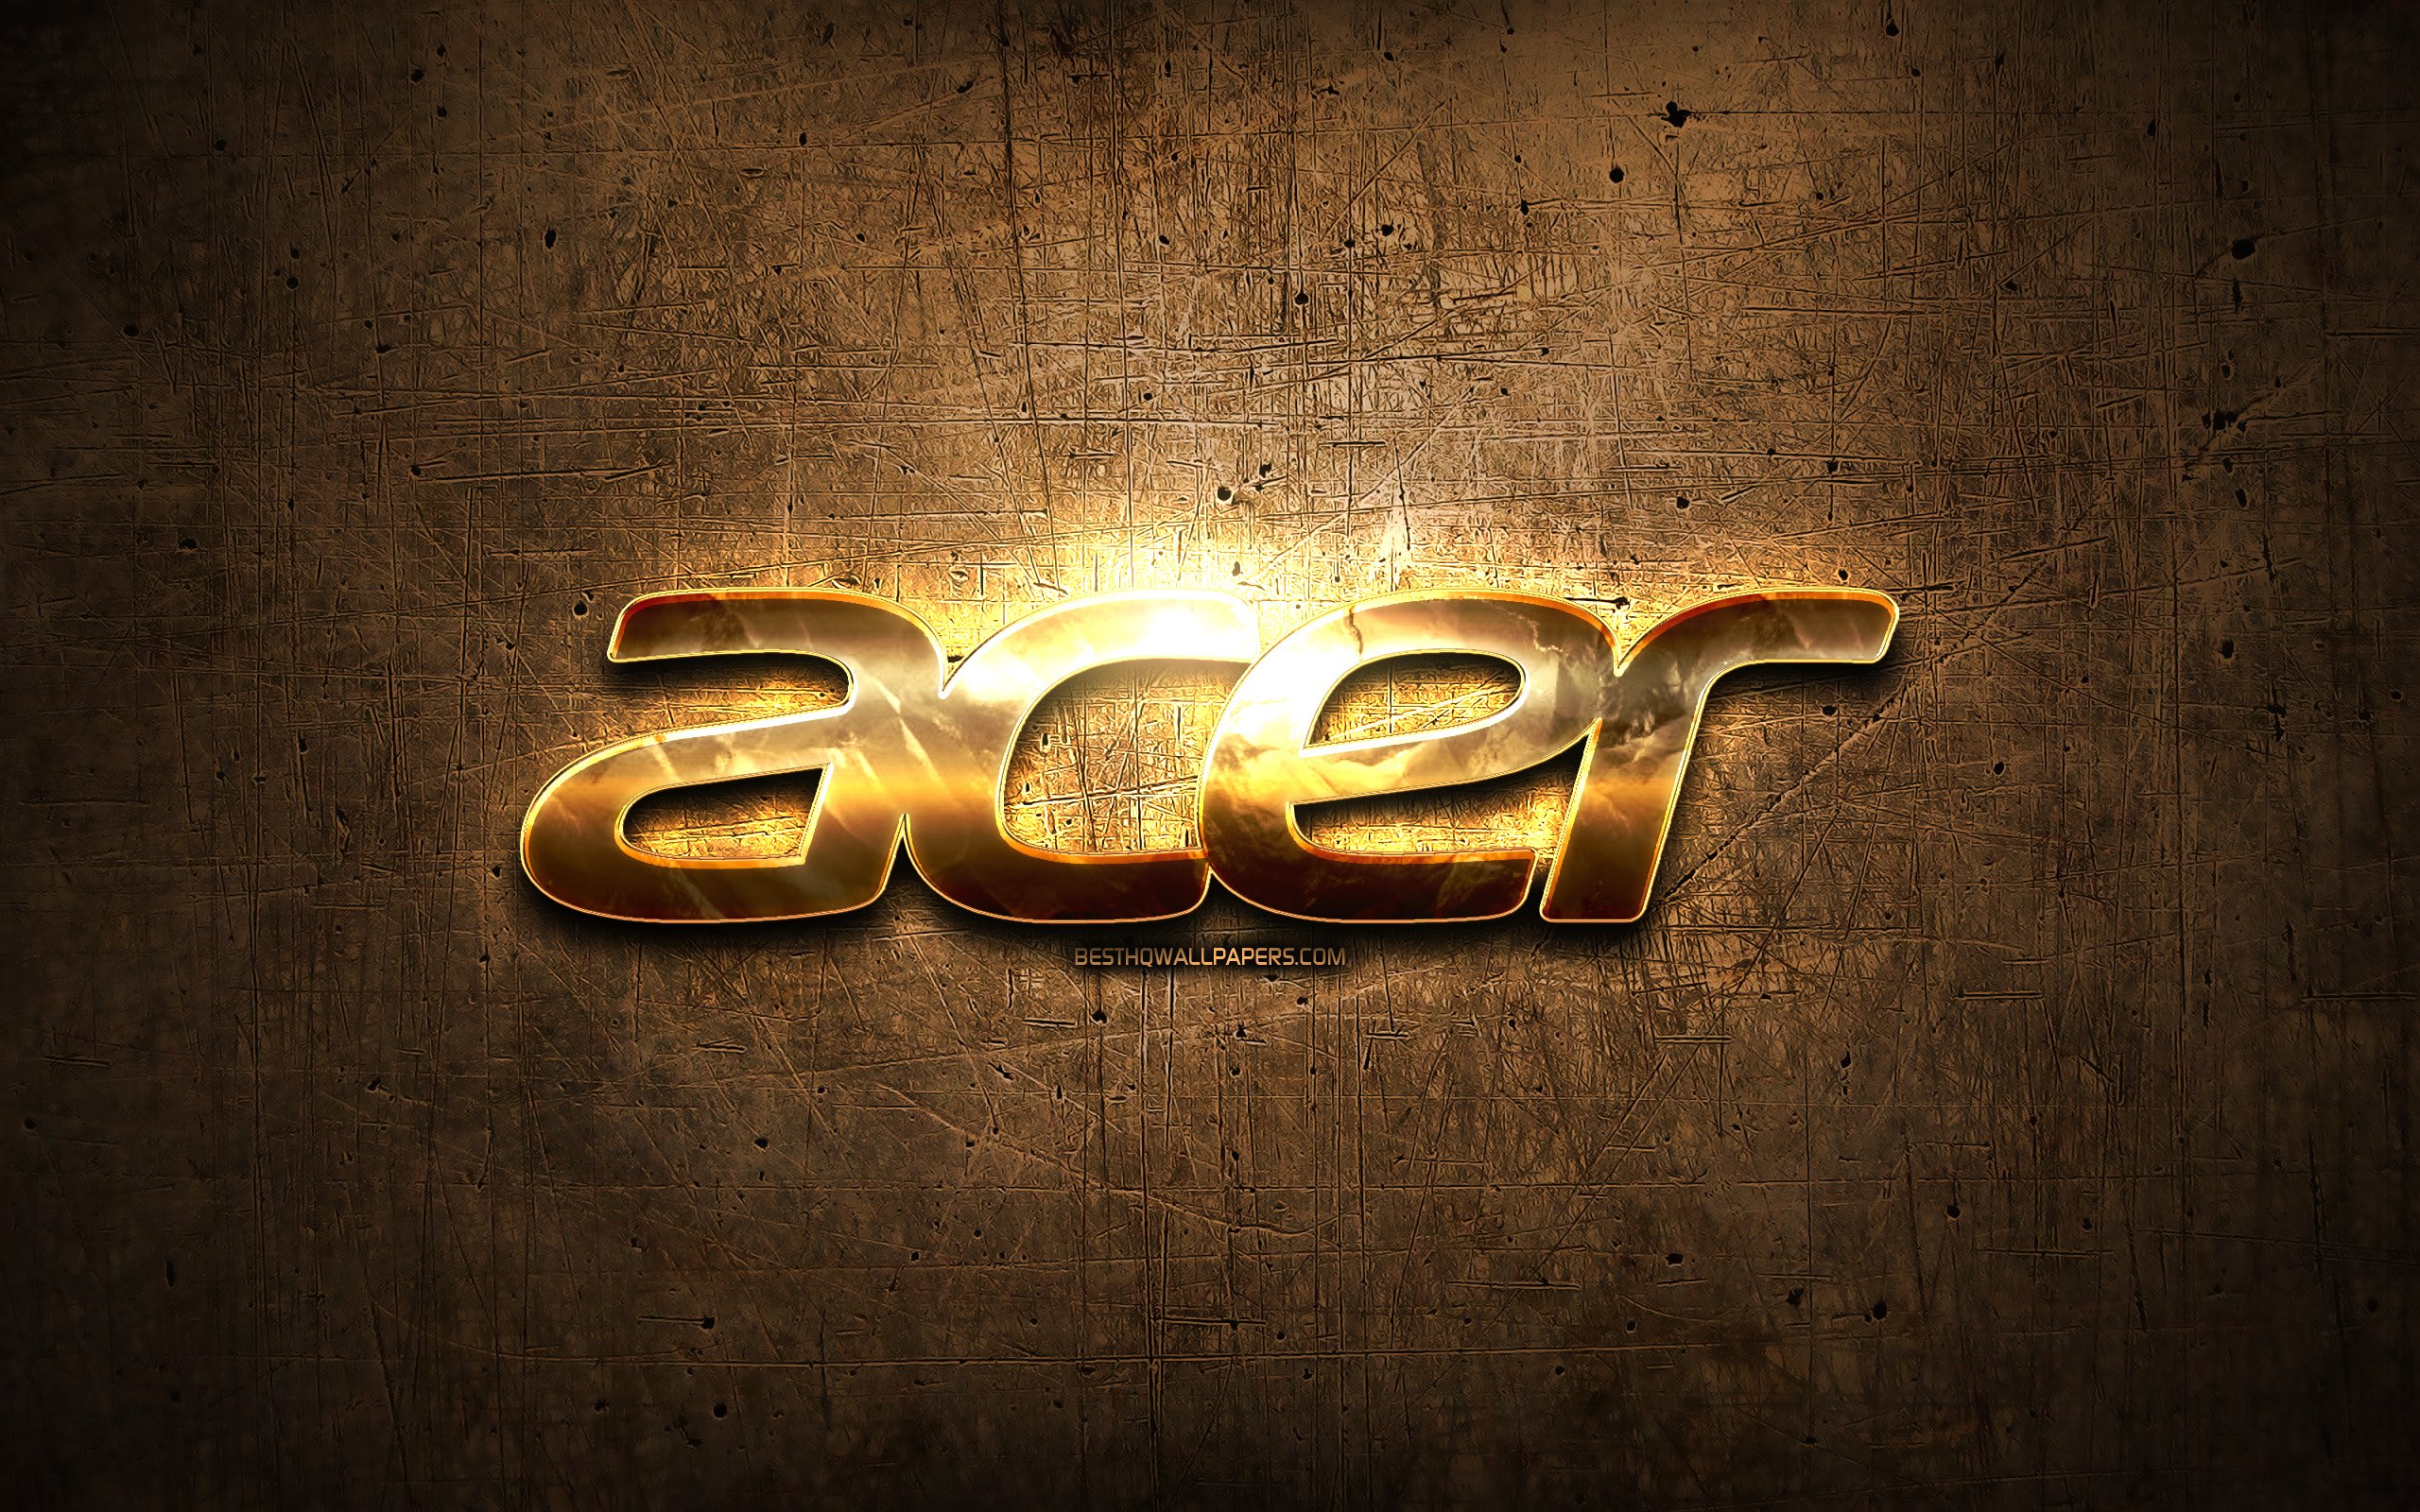 Download wallpapers Acer golden logo, artwork, brown metal background,  creative, Acer logo, brands, Acer for desktop with resolution 2560x1600.  High Quality HD pictures wallpapers